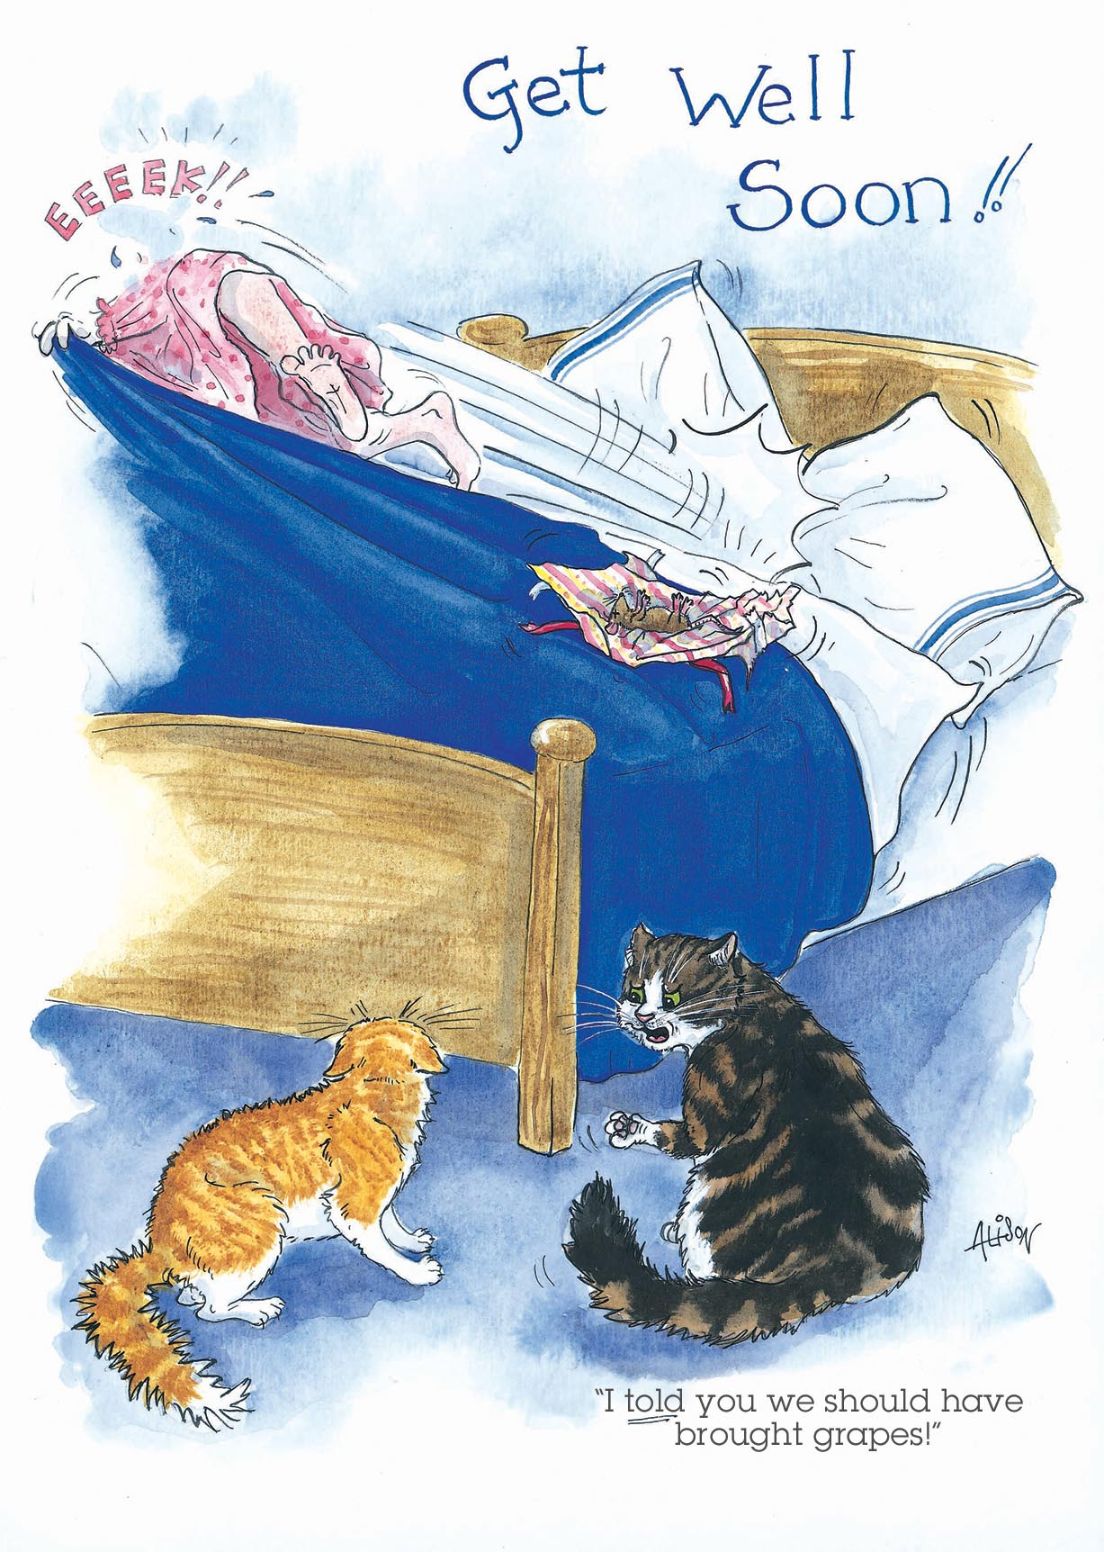 Get Well Soon Cats Helping Alison's Animals Cartoon Greeting Card